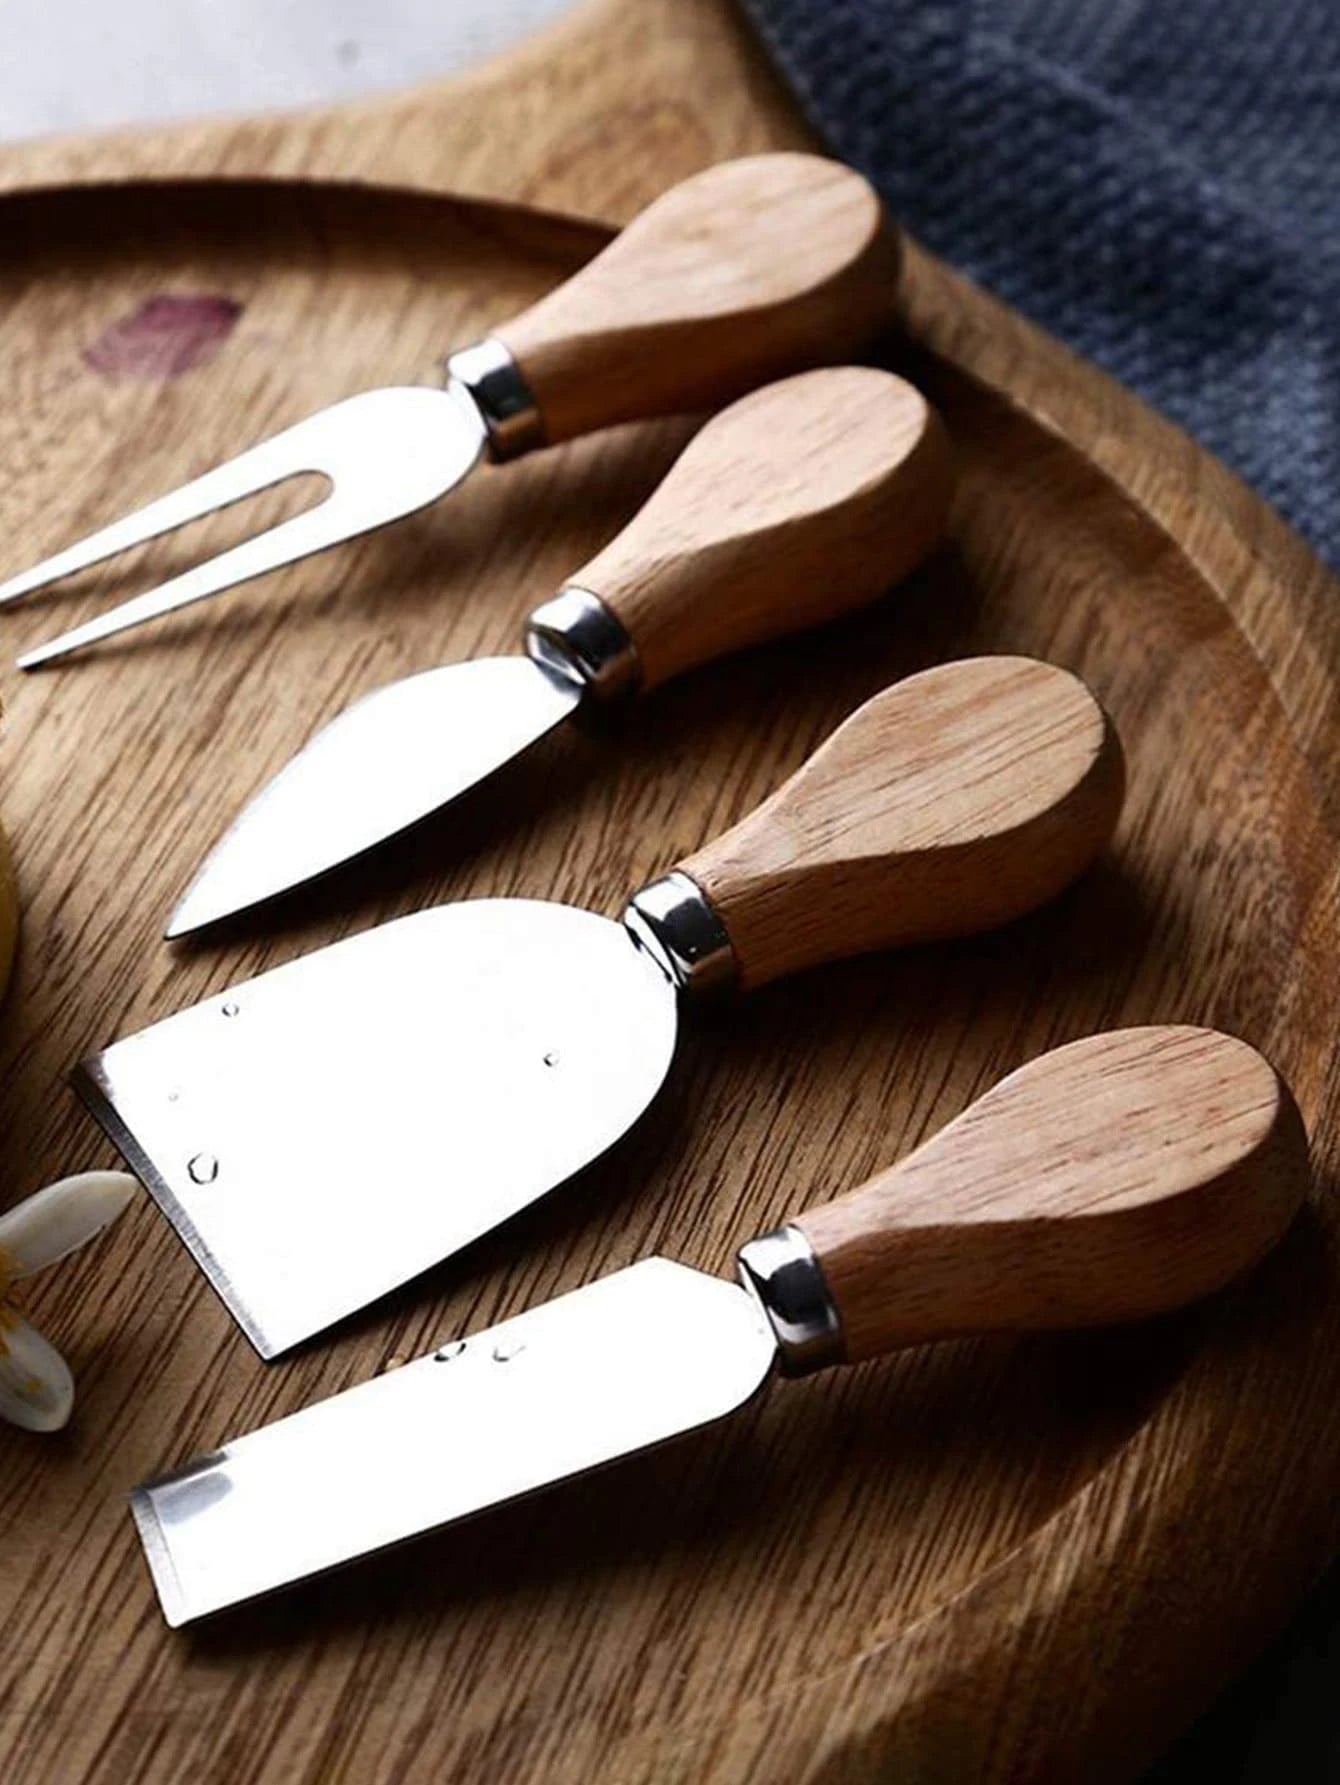 4 Piece Wooden Handle Cheese Knife Set